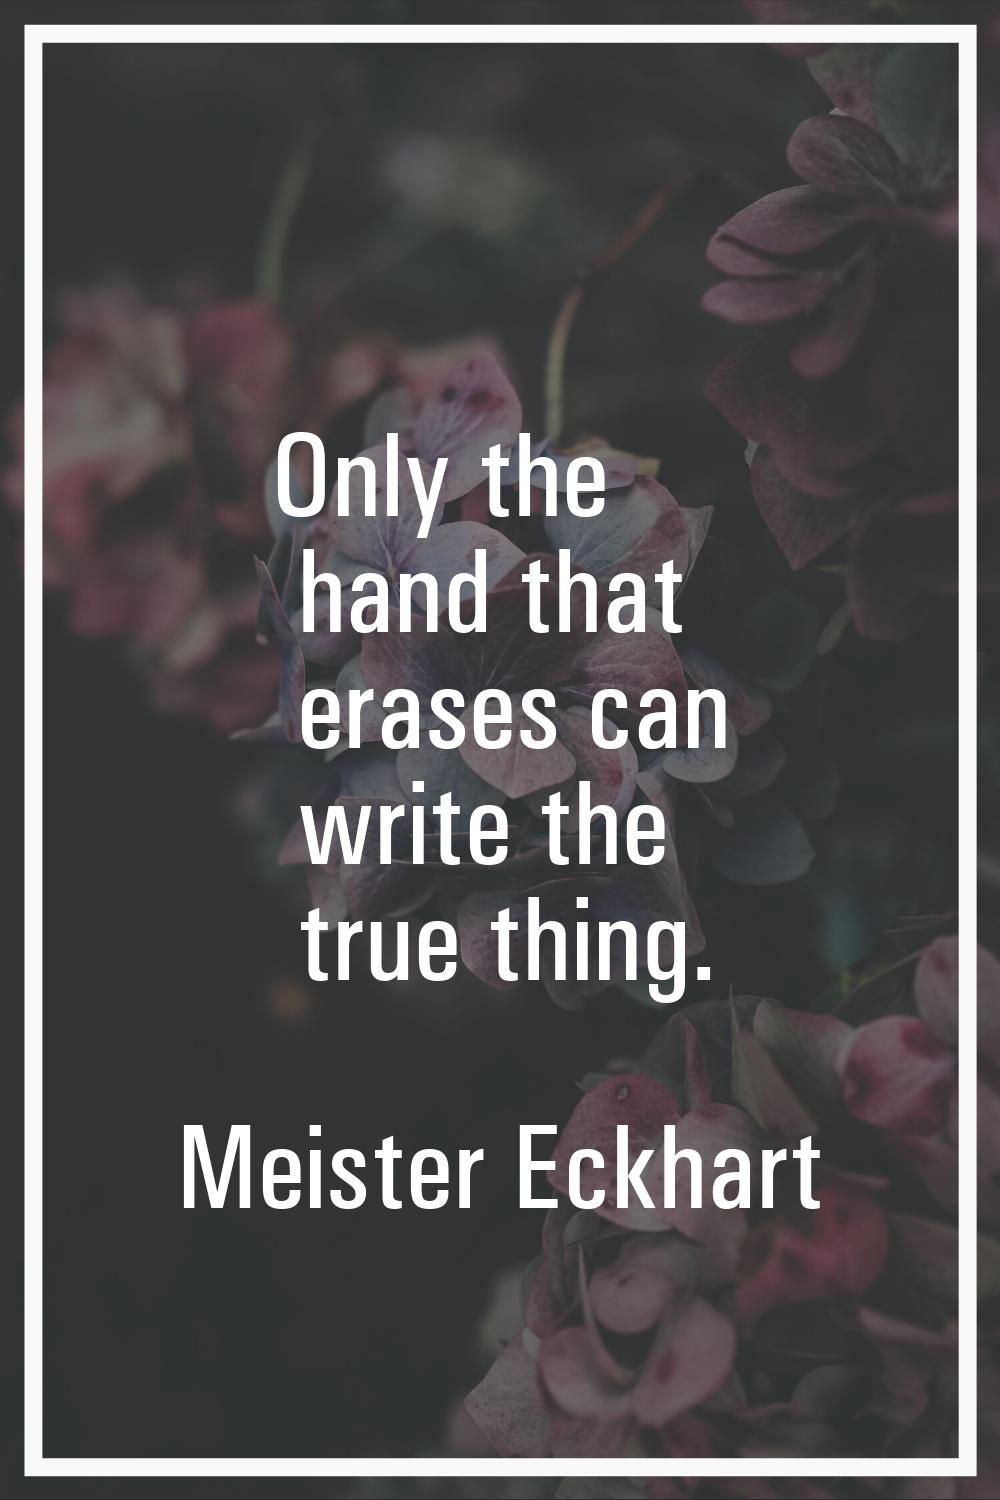 Only the hand that erases can write the true thing.